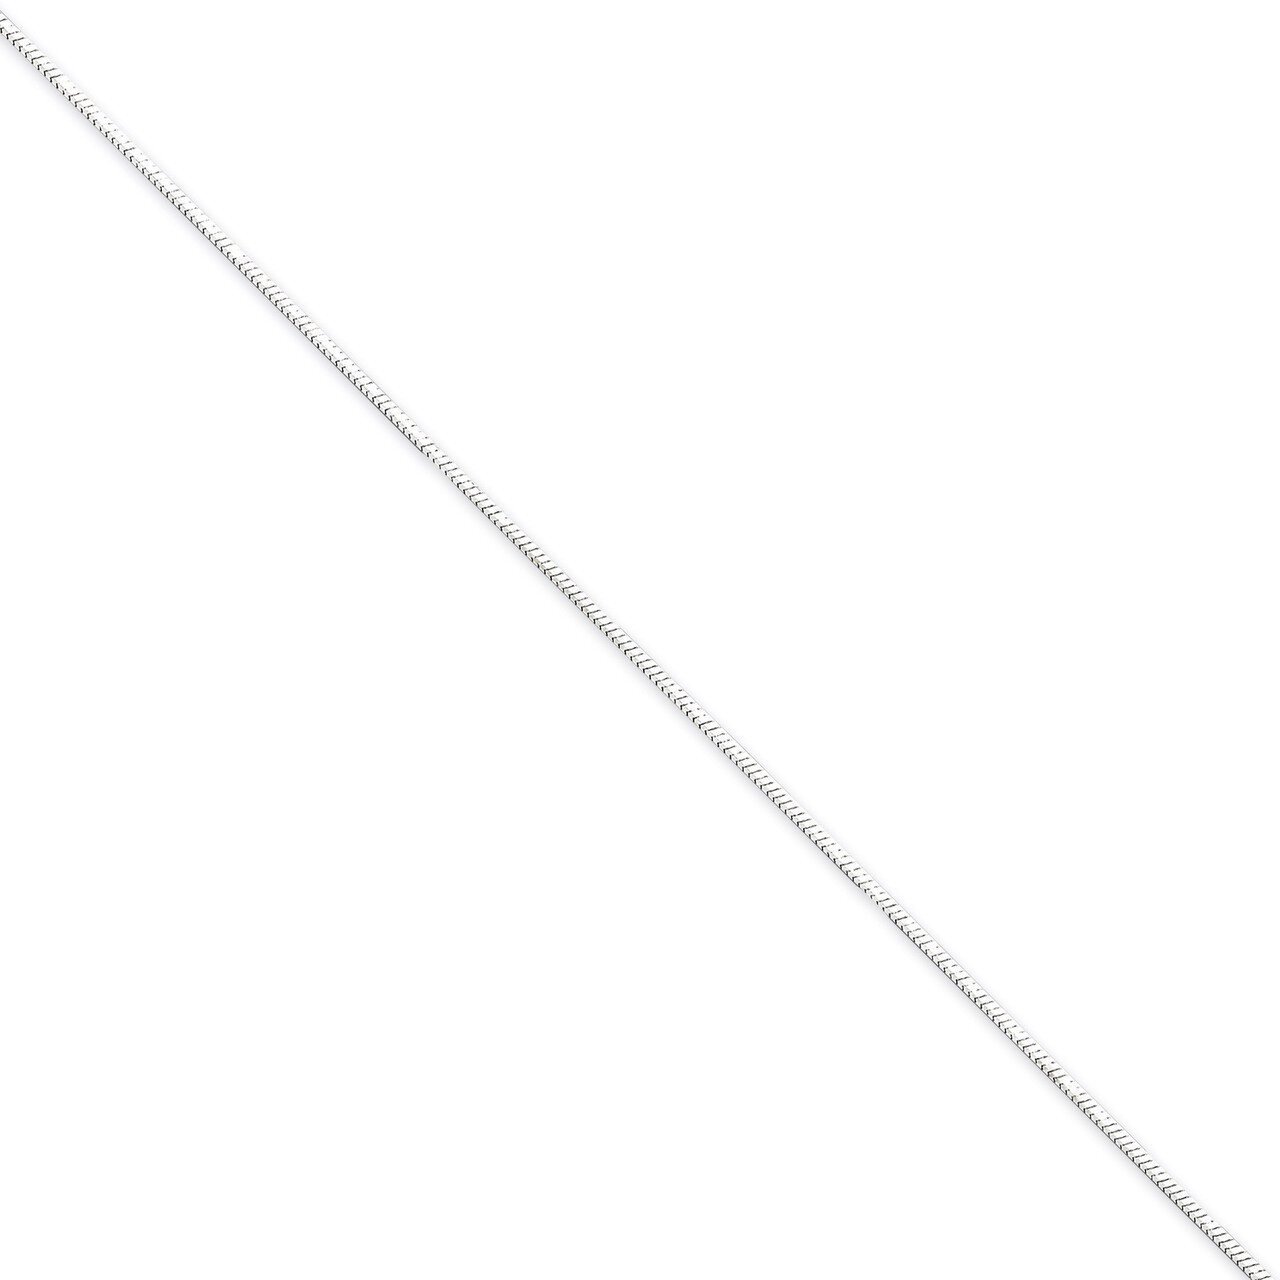 7 Inch 1.5mm Diamond-cut Flat Snake Chain Sterling Silver QSF160-7